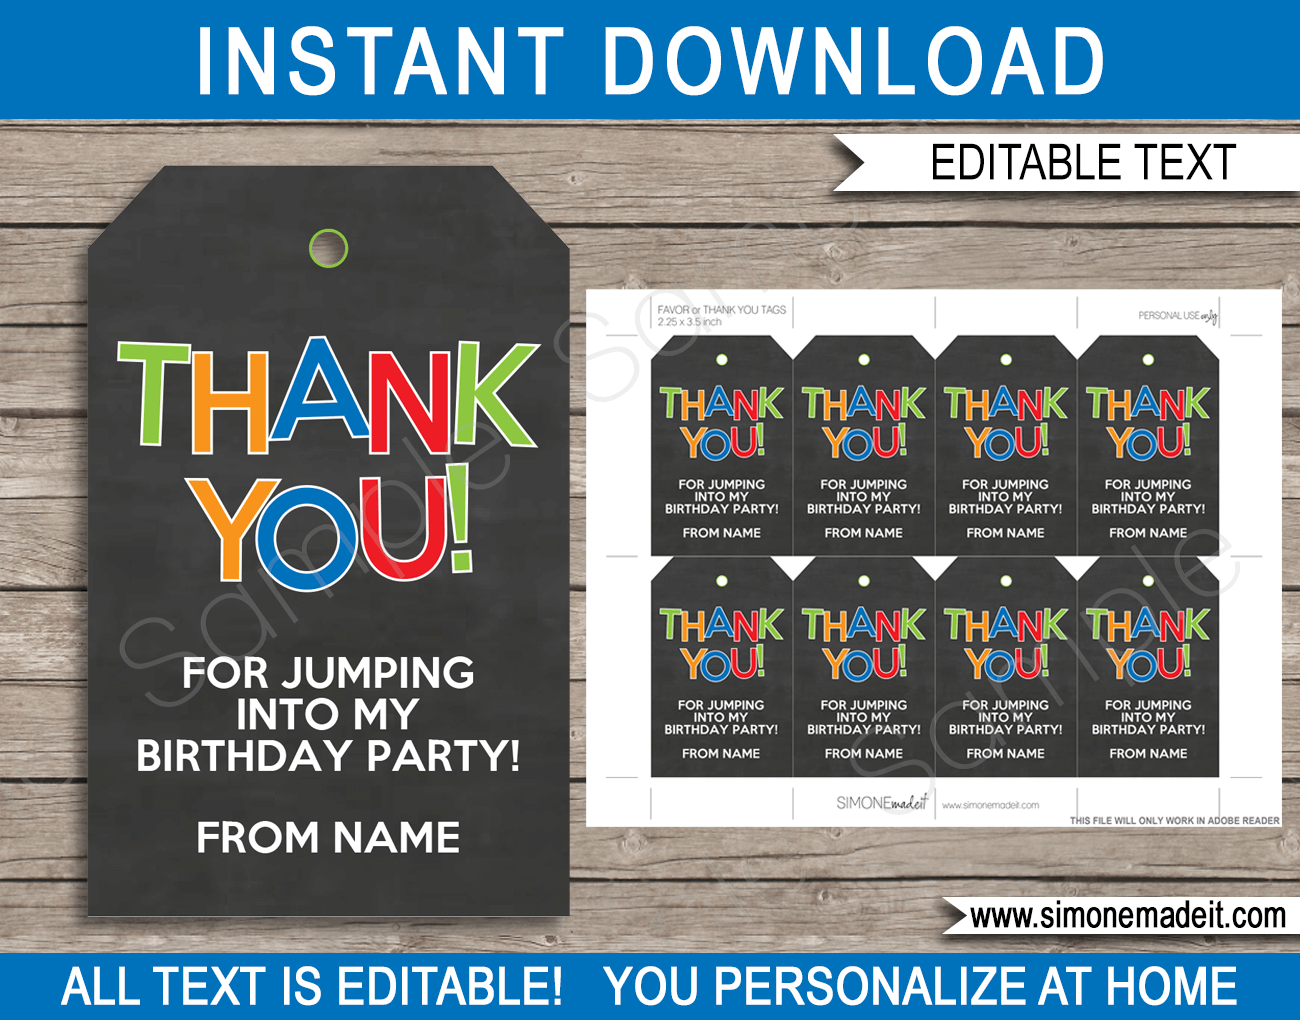 Trampoline Party Favor Tags | Thank You Tags | Birthday Party | Editable DIY Template | $3.00 INSTANT DOWNLOAD via SIMONEmadeit.com